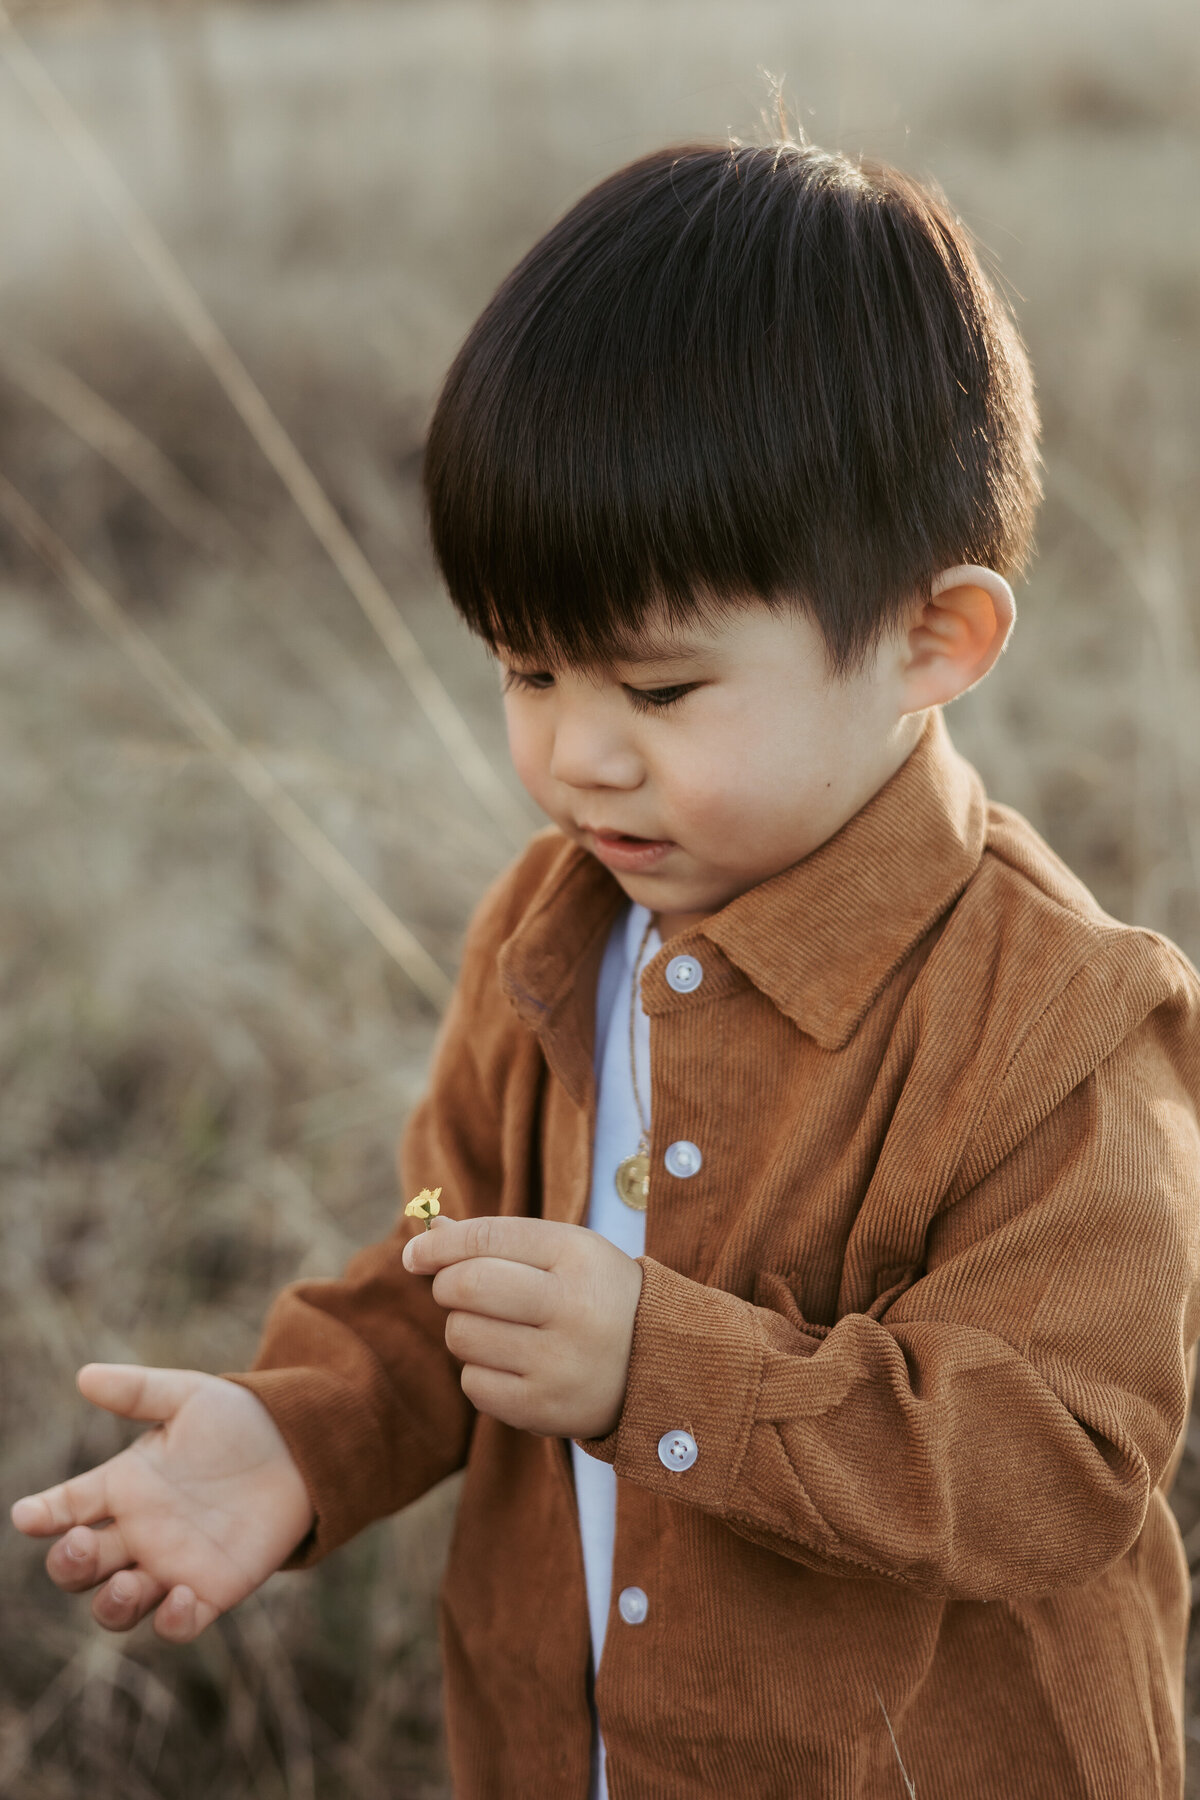 Little by in a a brown cord shirt holding a little yellow flower that his picked during his family photoshoot.